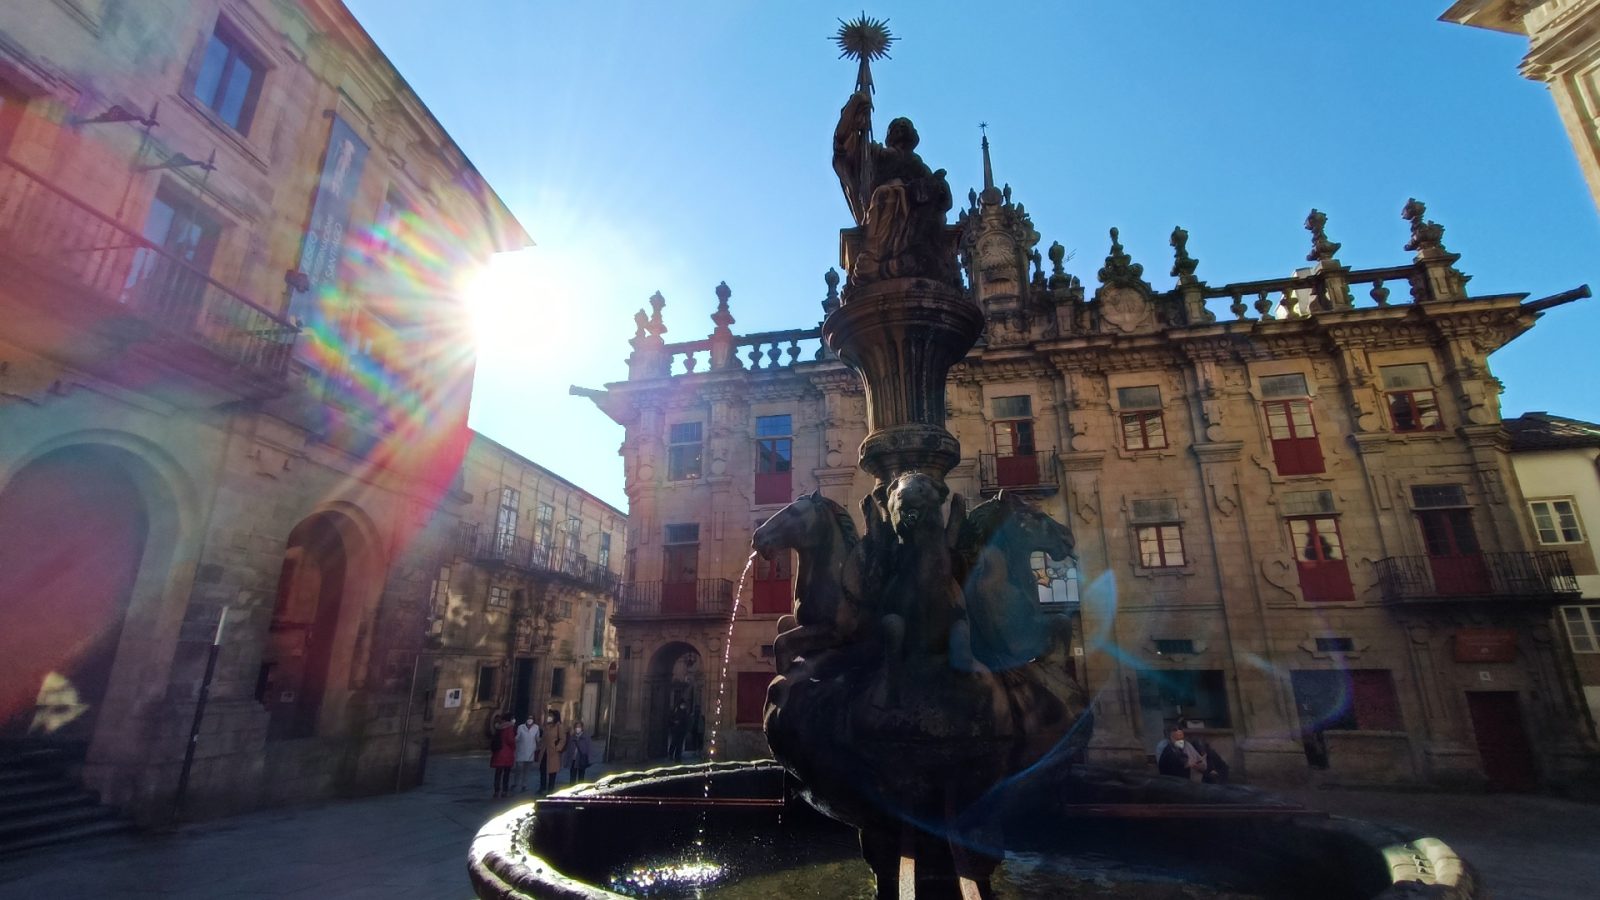 Where to Stay in Santiago de Compostela - Best Areas & Hotels